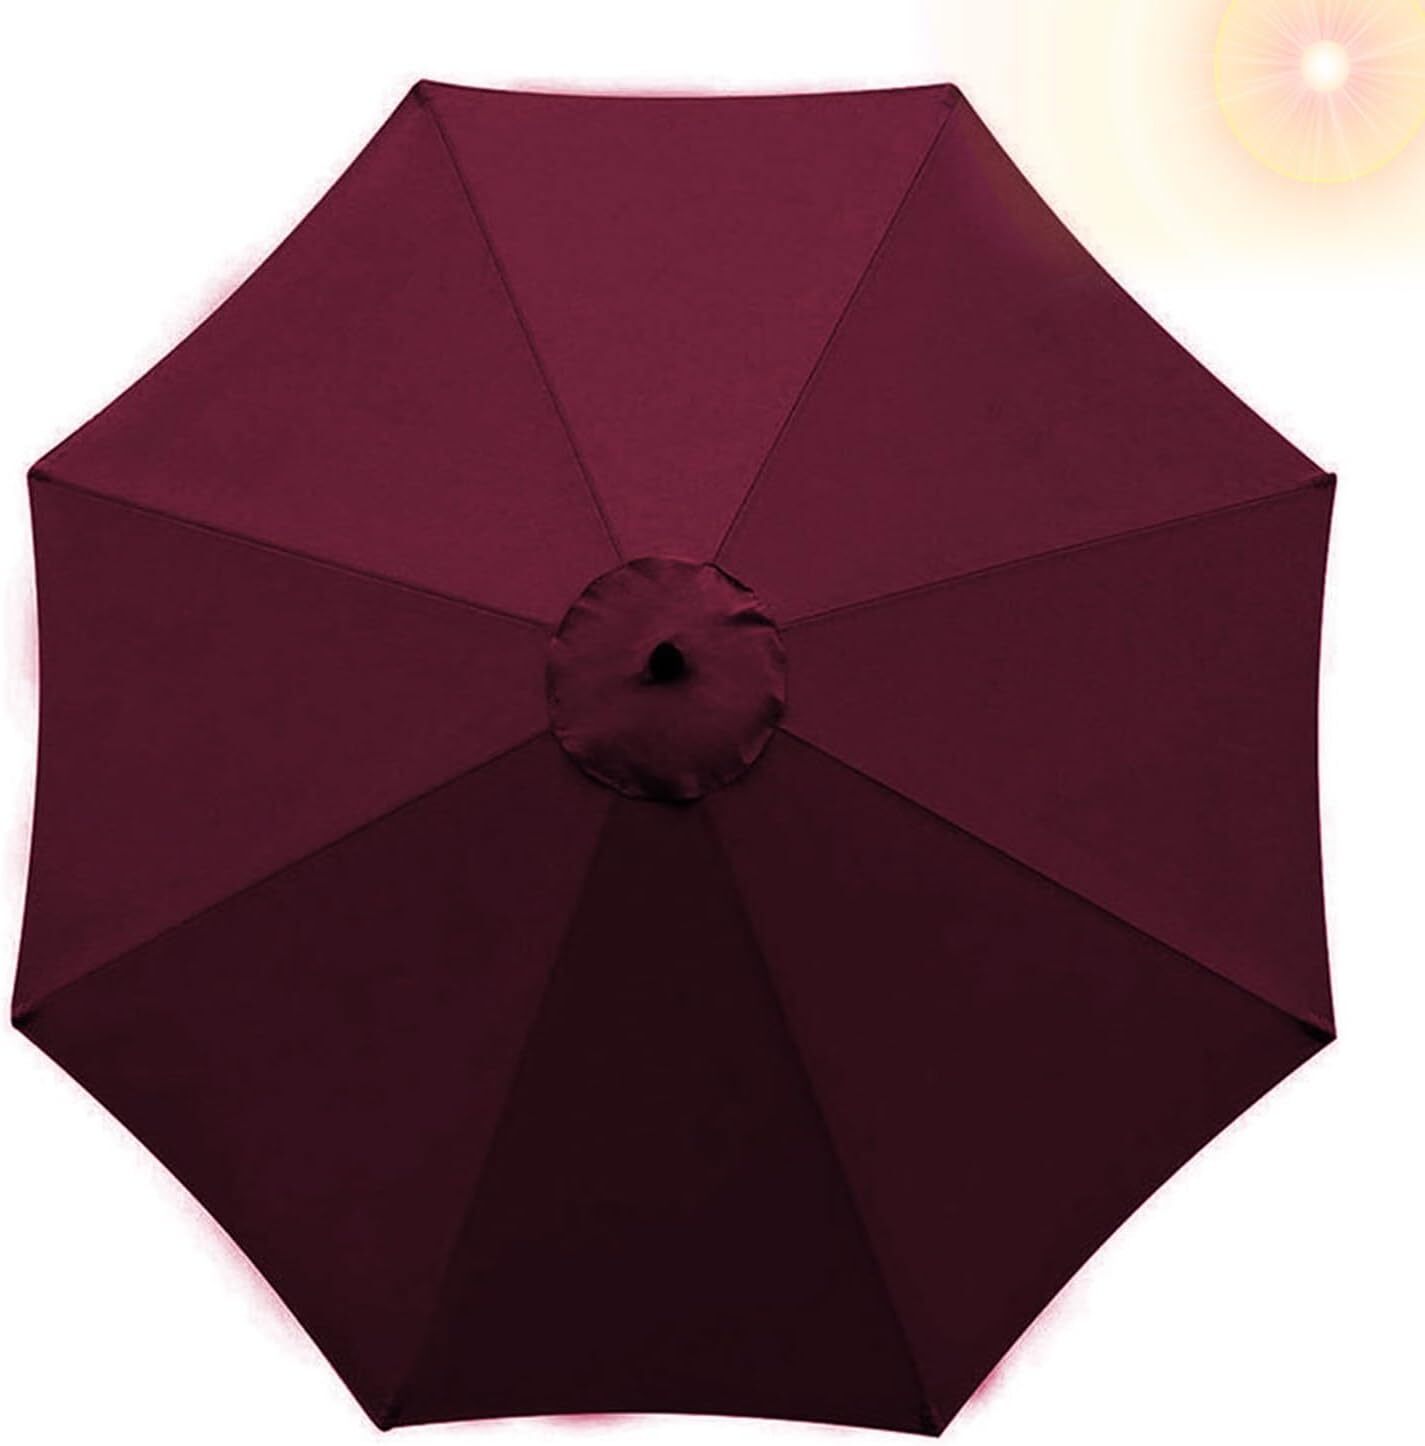 3m Patio Umbrella Replacement Cover 10ft 8 Ribs Large Outdoor Canopy (Maroon)